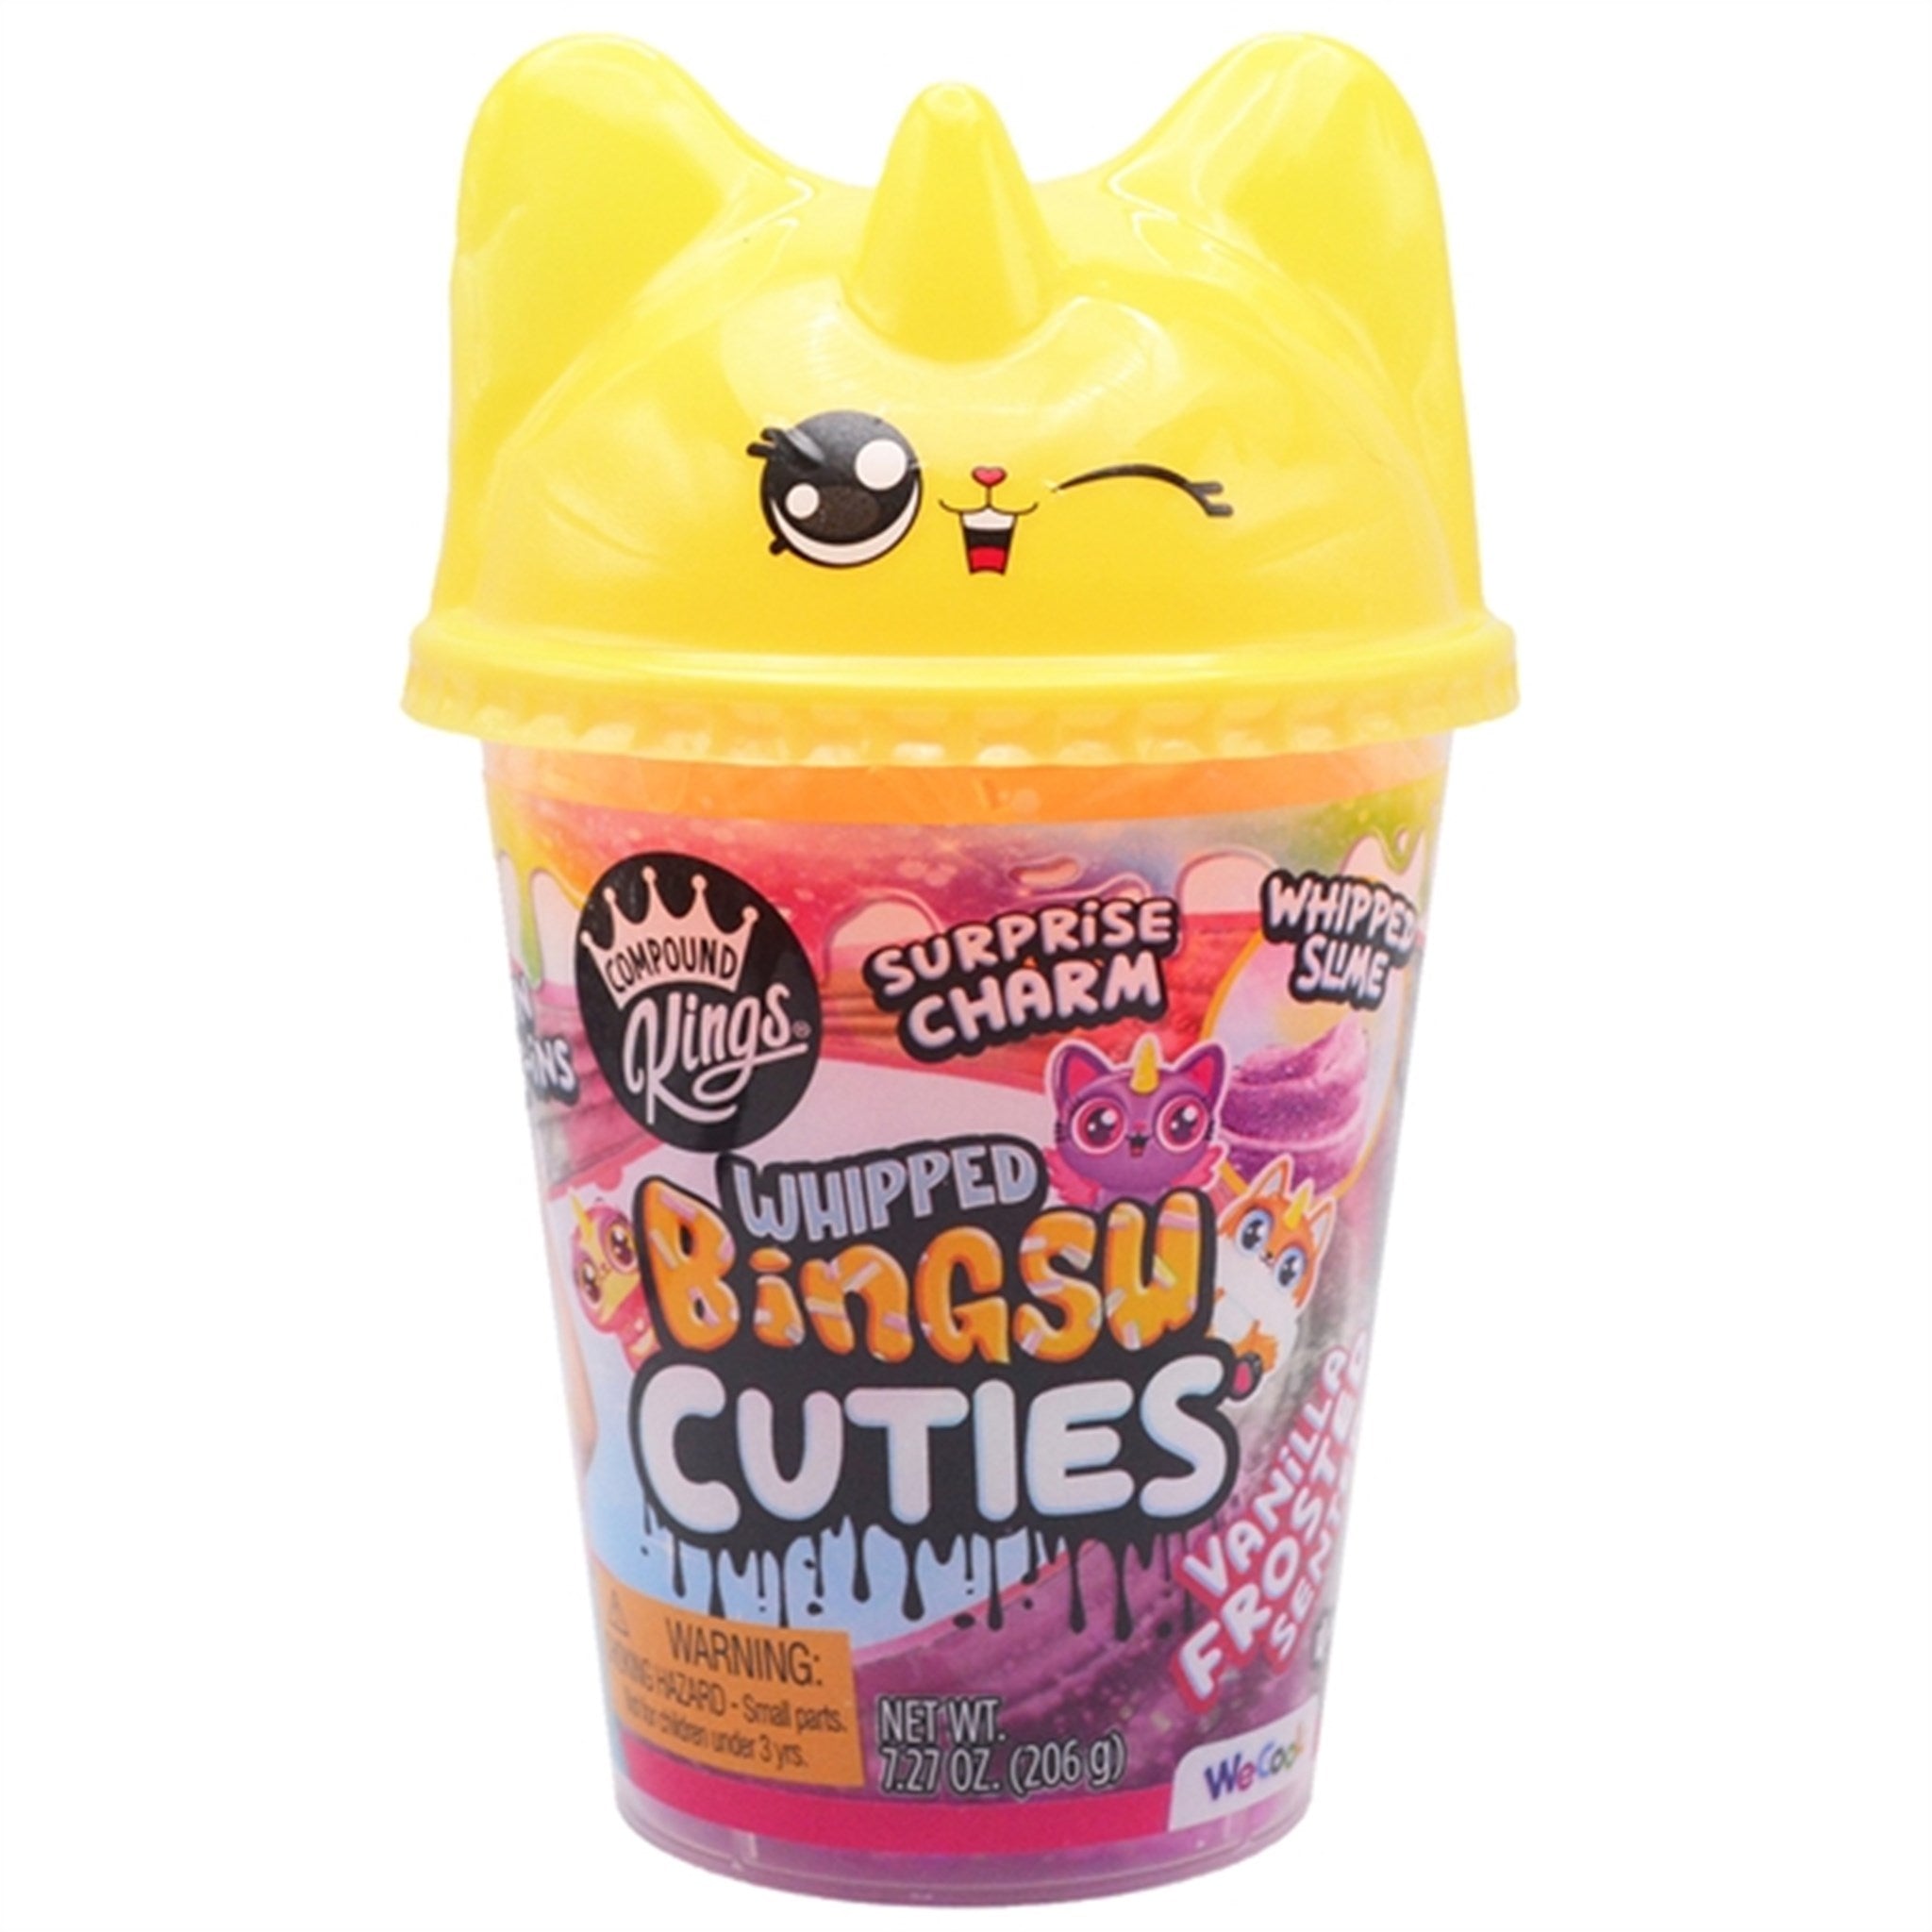 Compound Kings Scented Slime Bingsu Cuties Vanilla Frosted 3